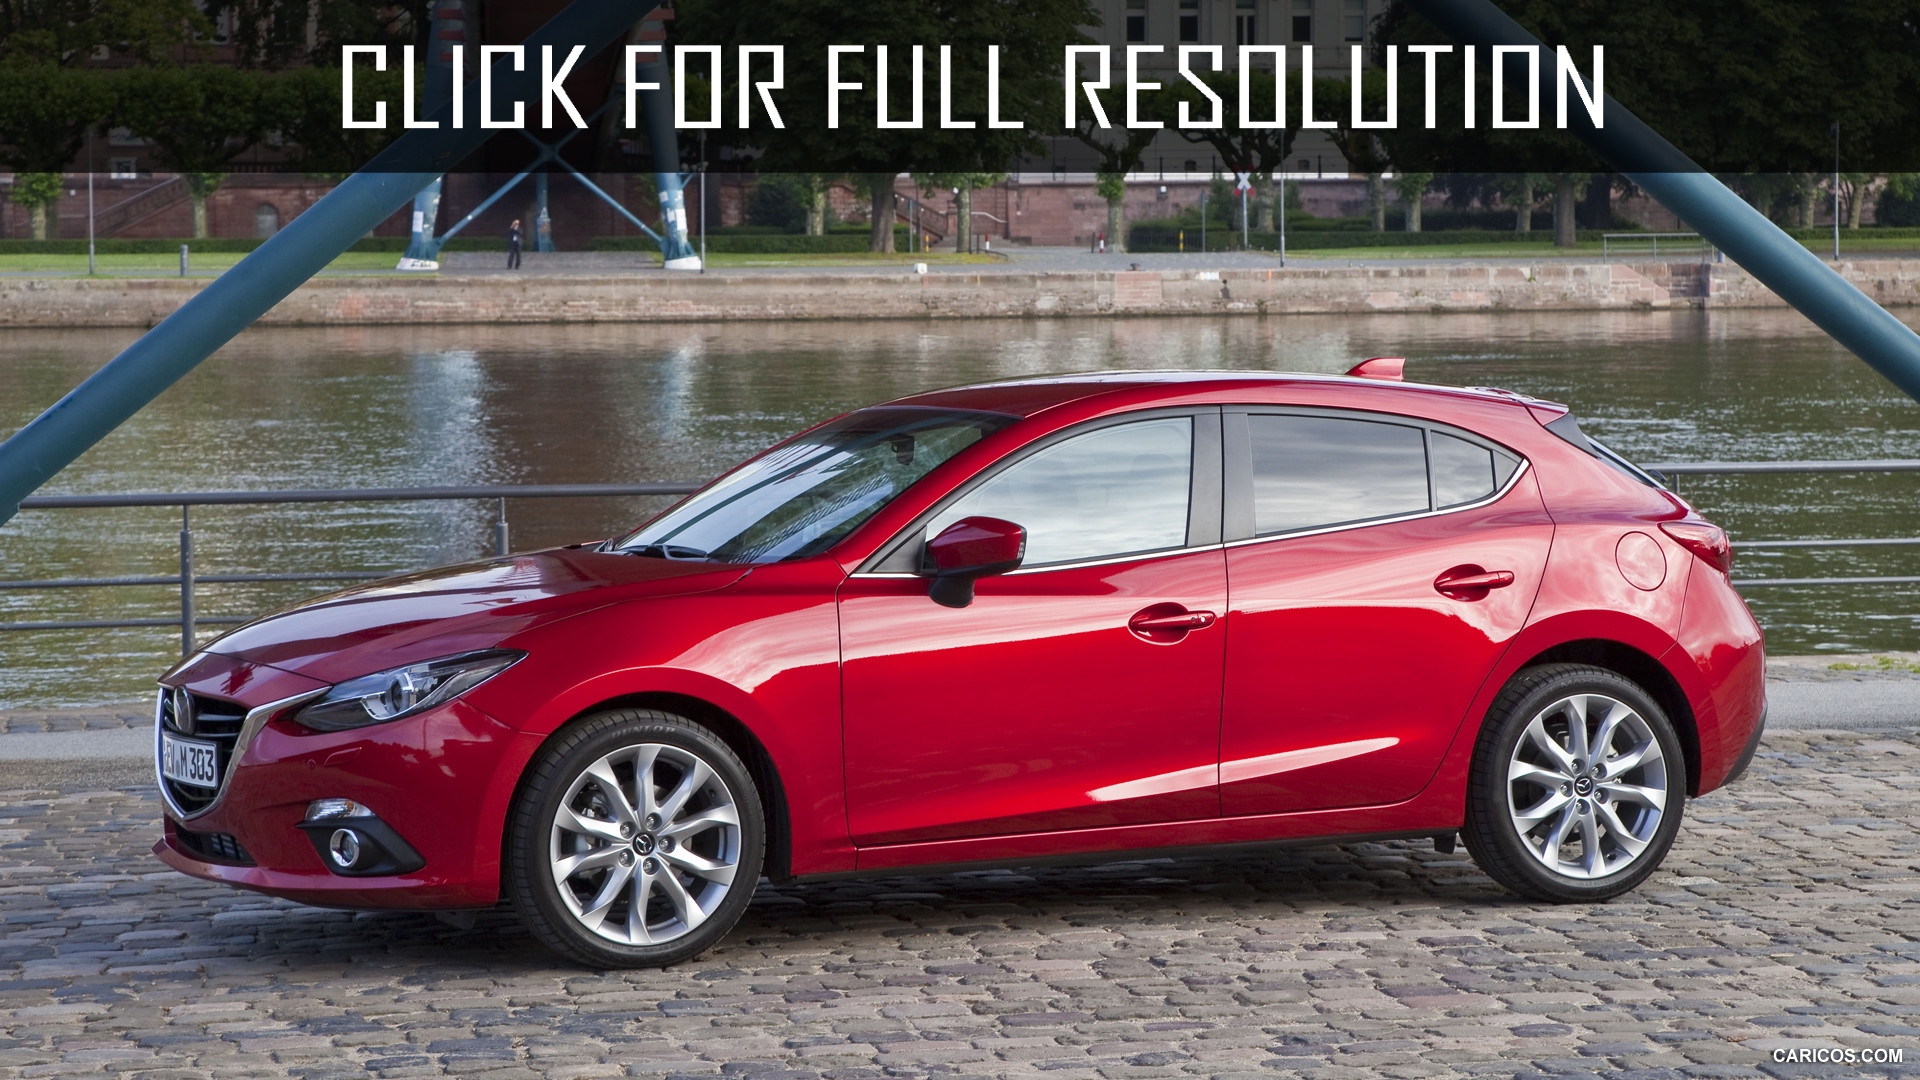 2014 Mazda 3 Hatchback news, reviews, msrp, ratings with